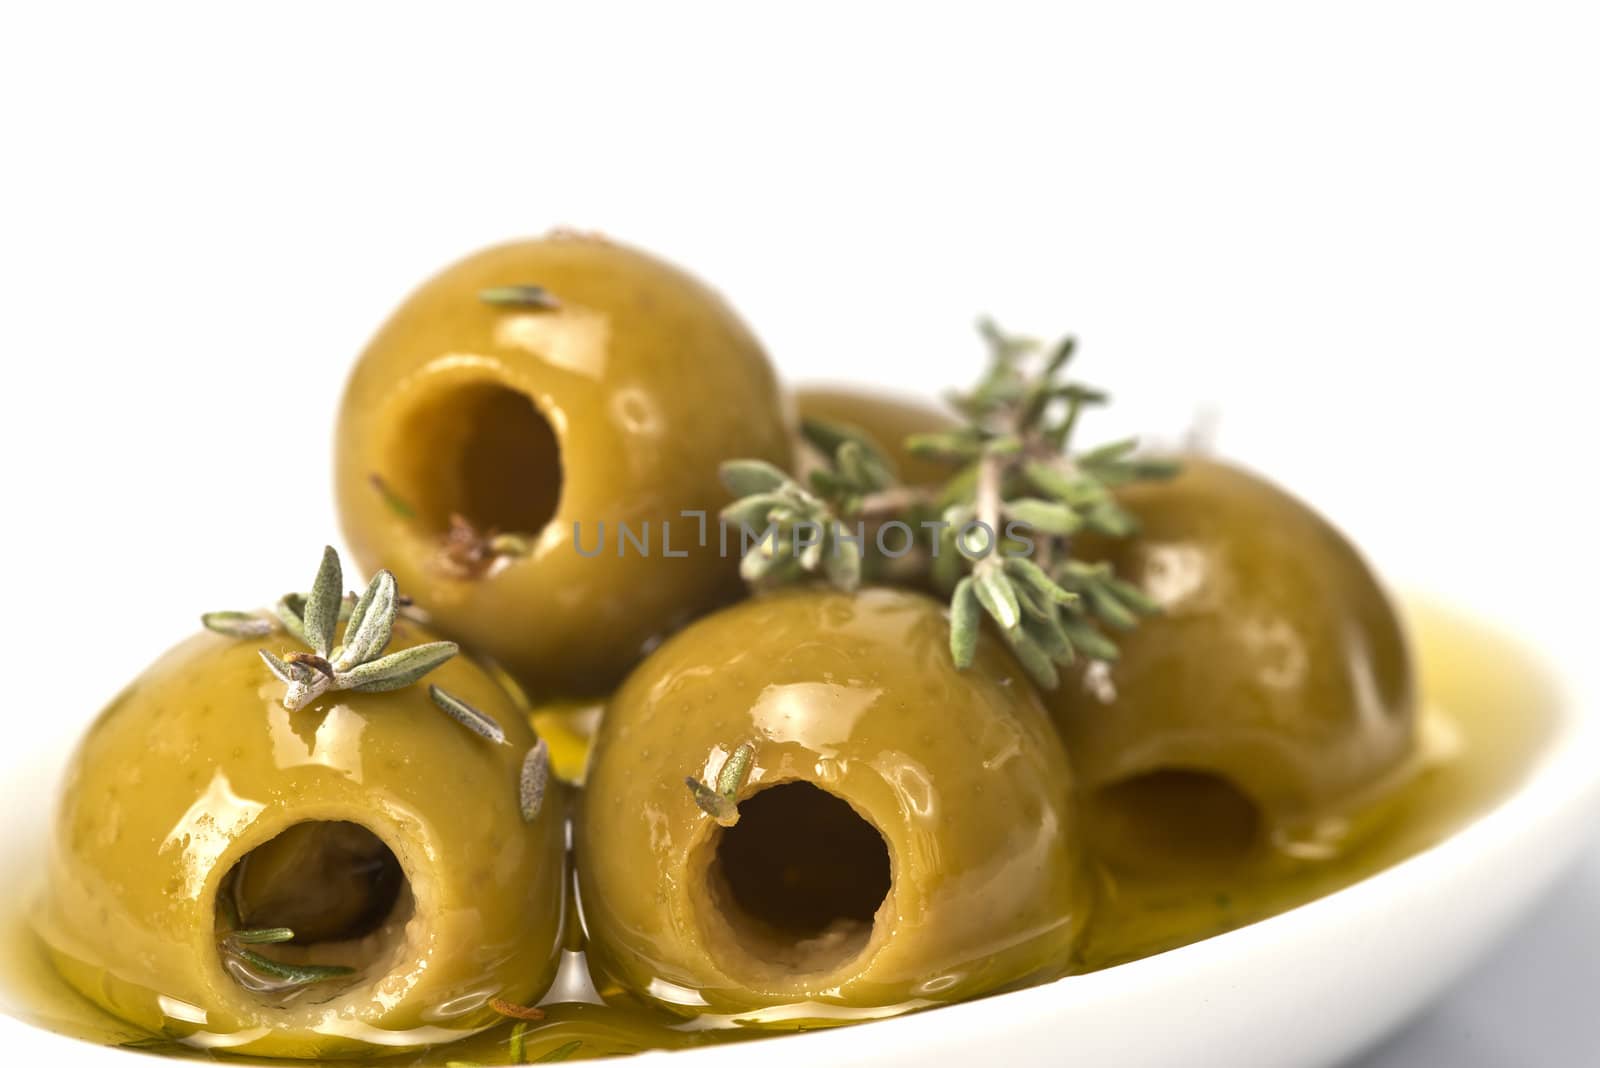 Pitted olives in a saucer isolated on a white background.